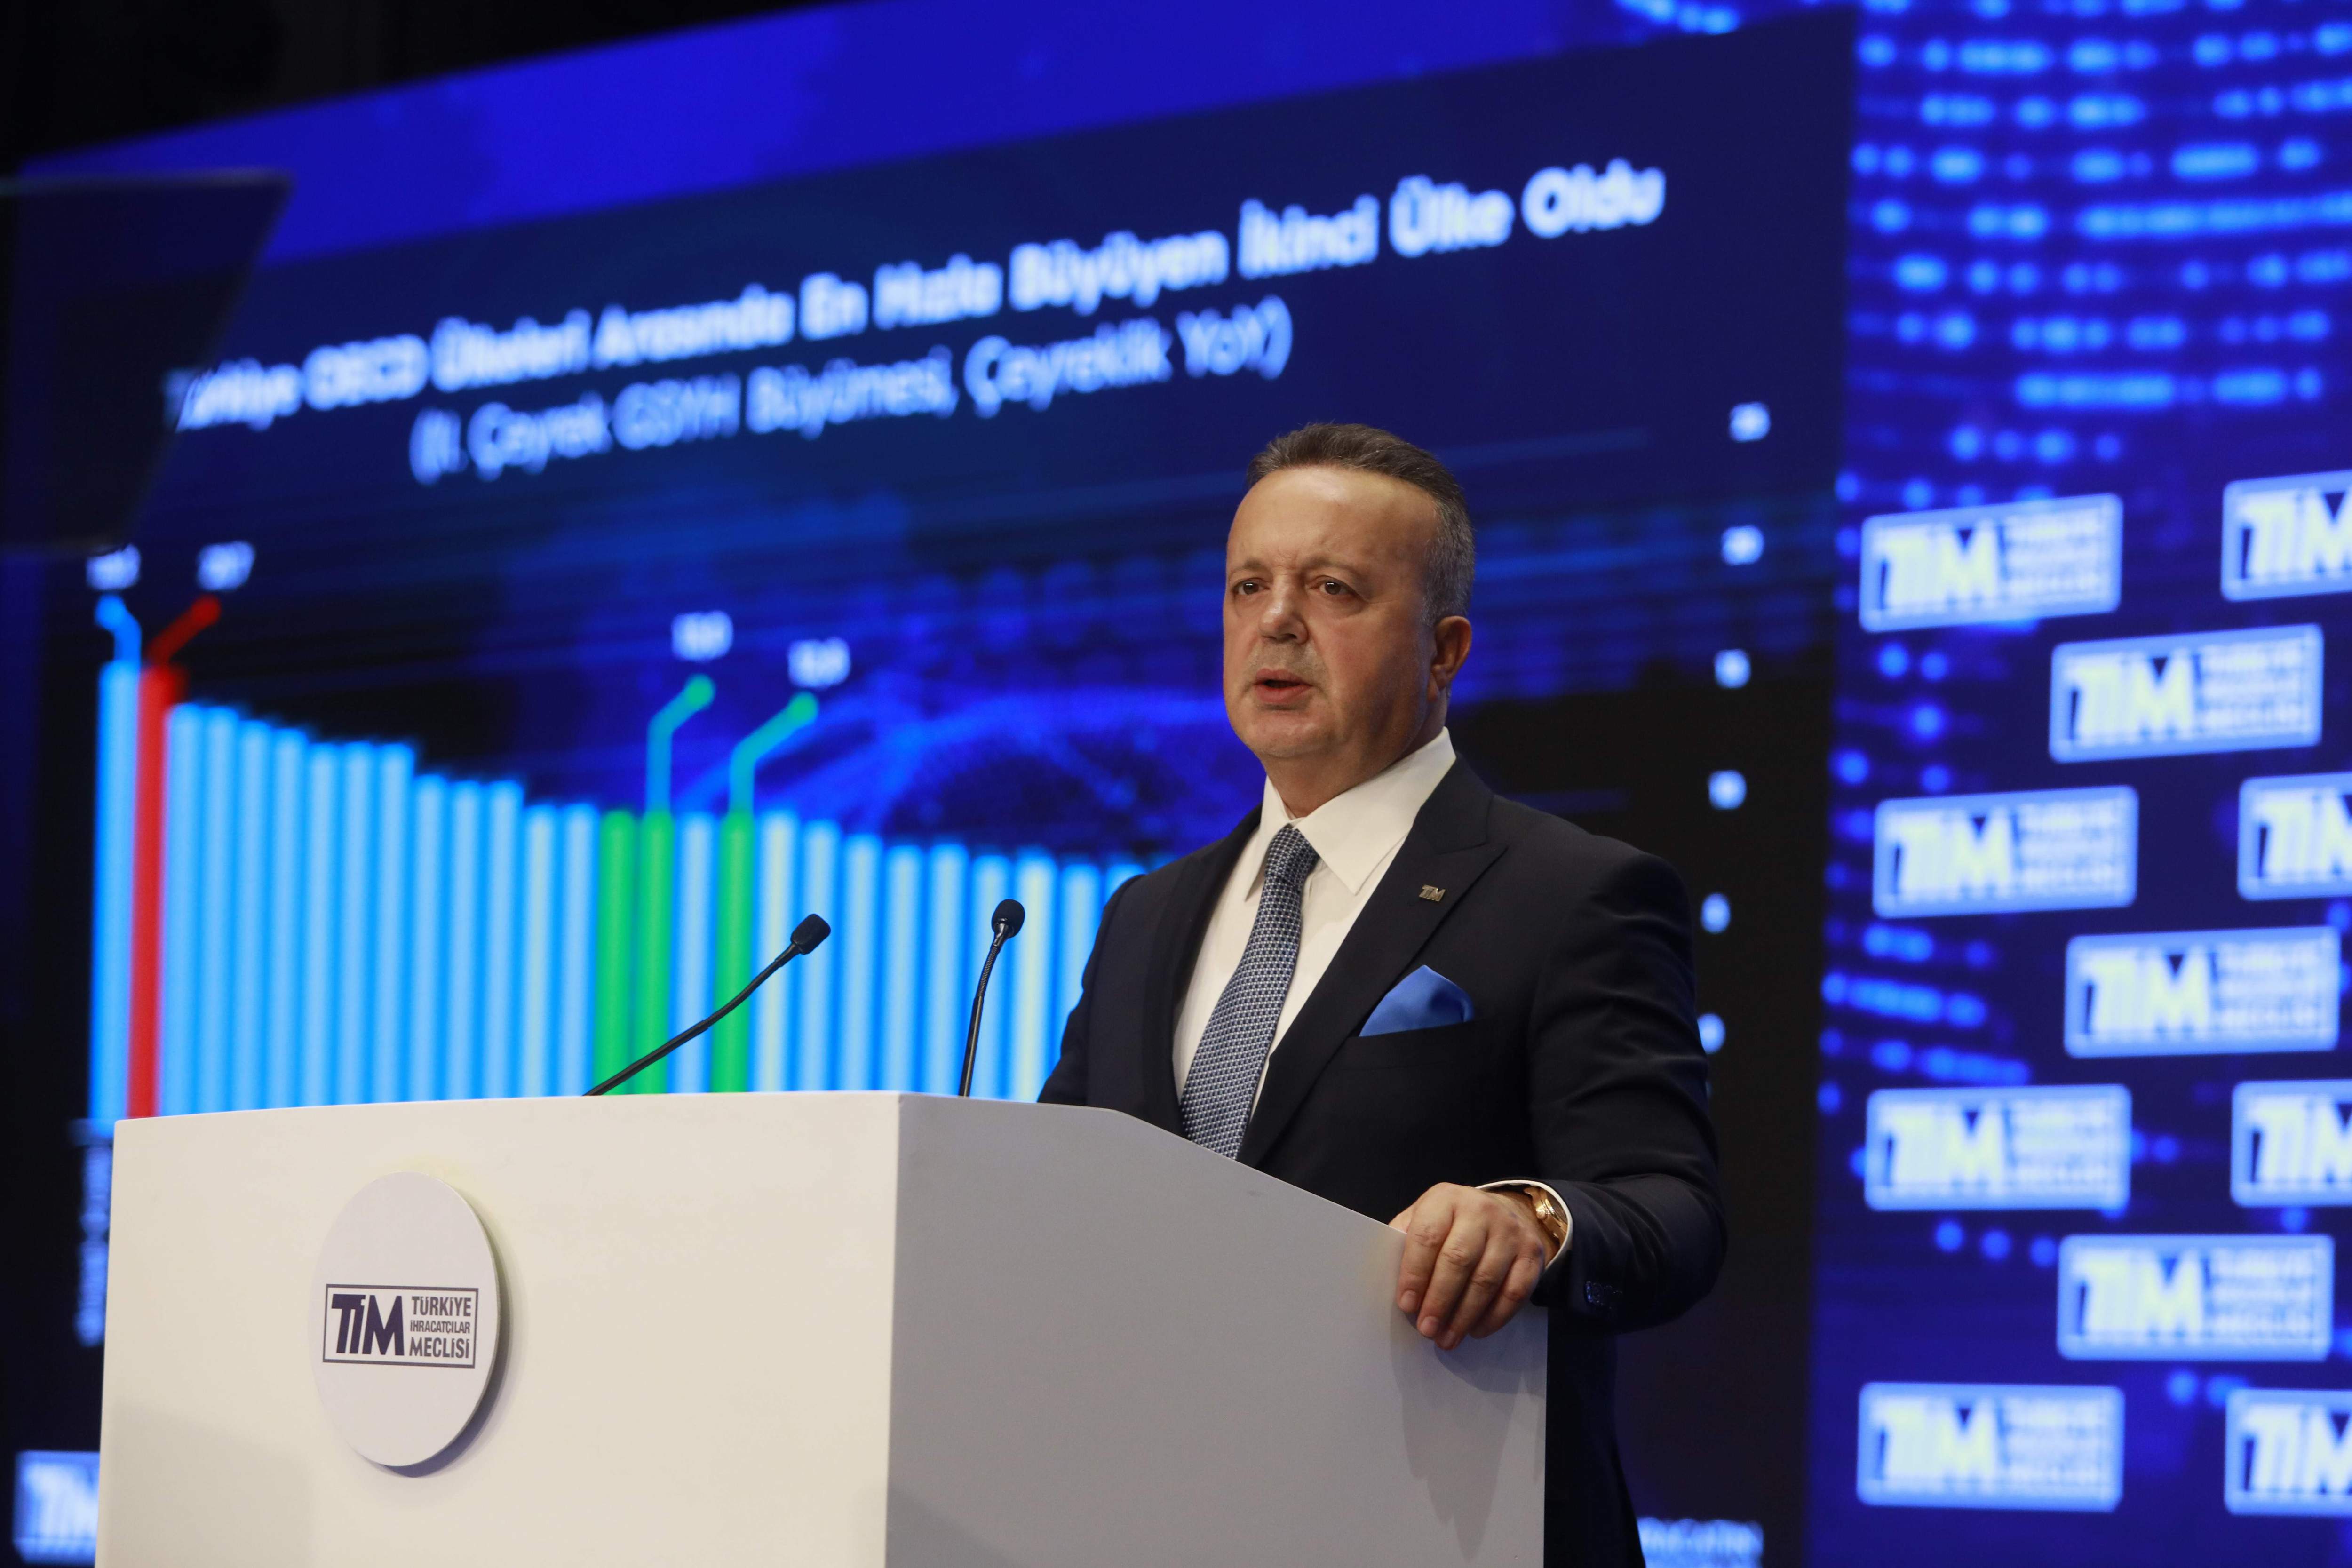 TİM Chairman Gülle: "We Will Support the Steps Taken Towards the Stability of Our National Currency"